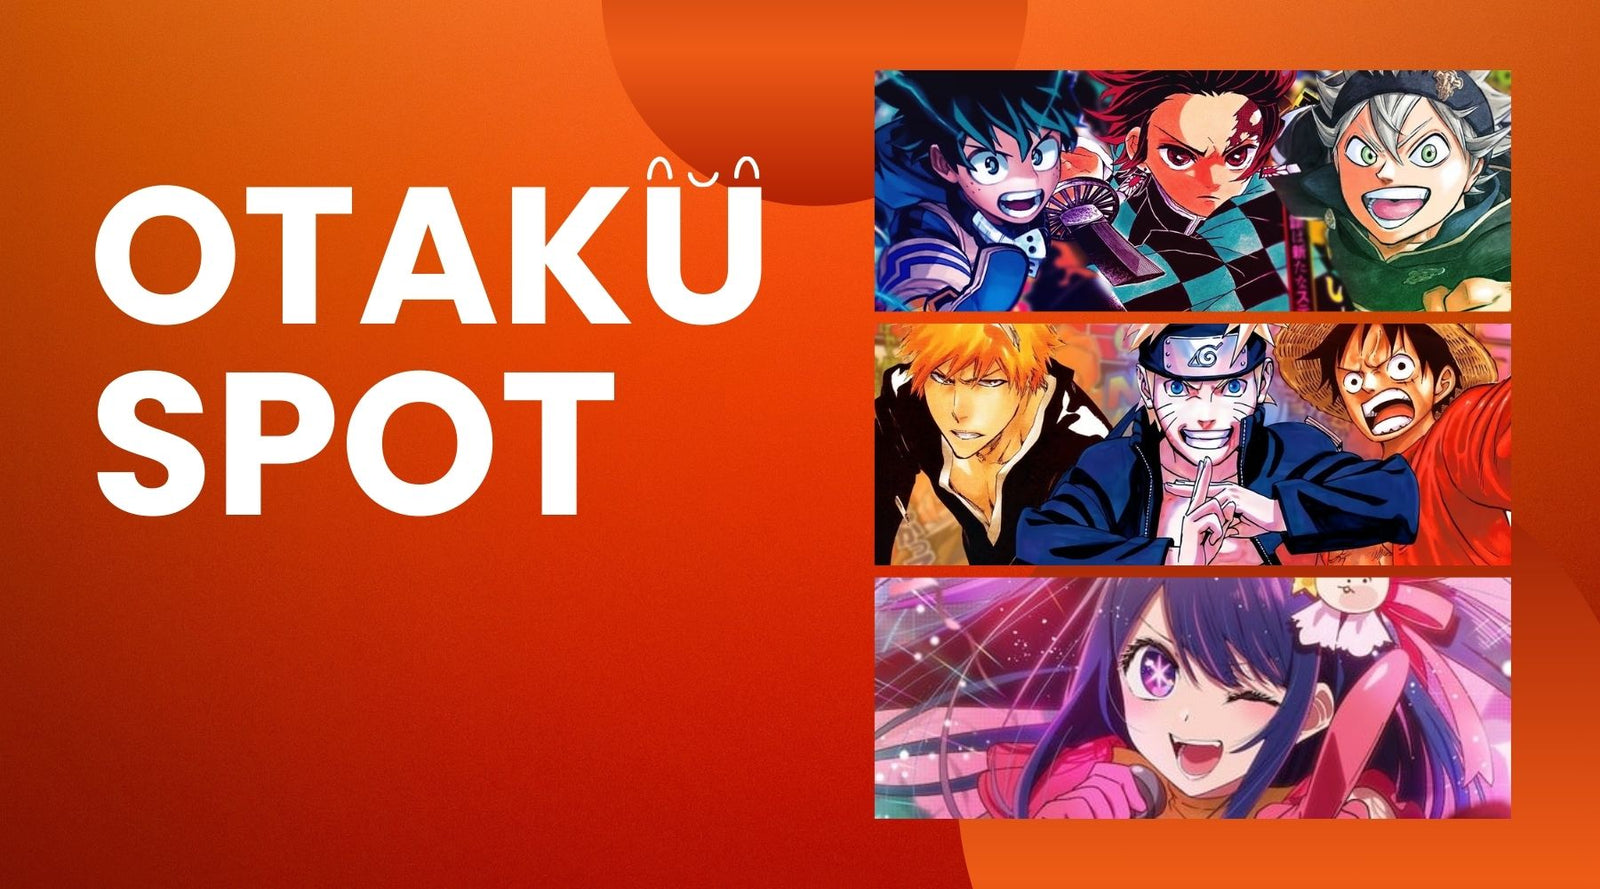 The Ultimate Guide to Understanding Different Types of Otakus